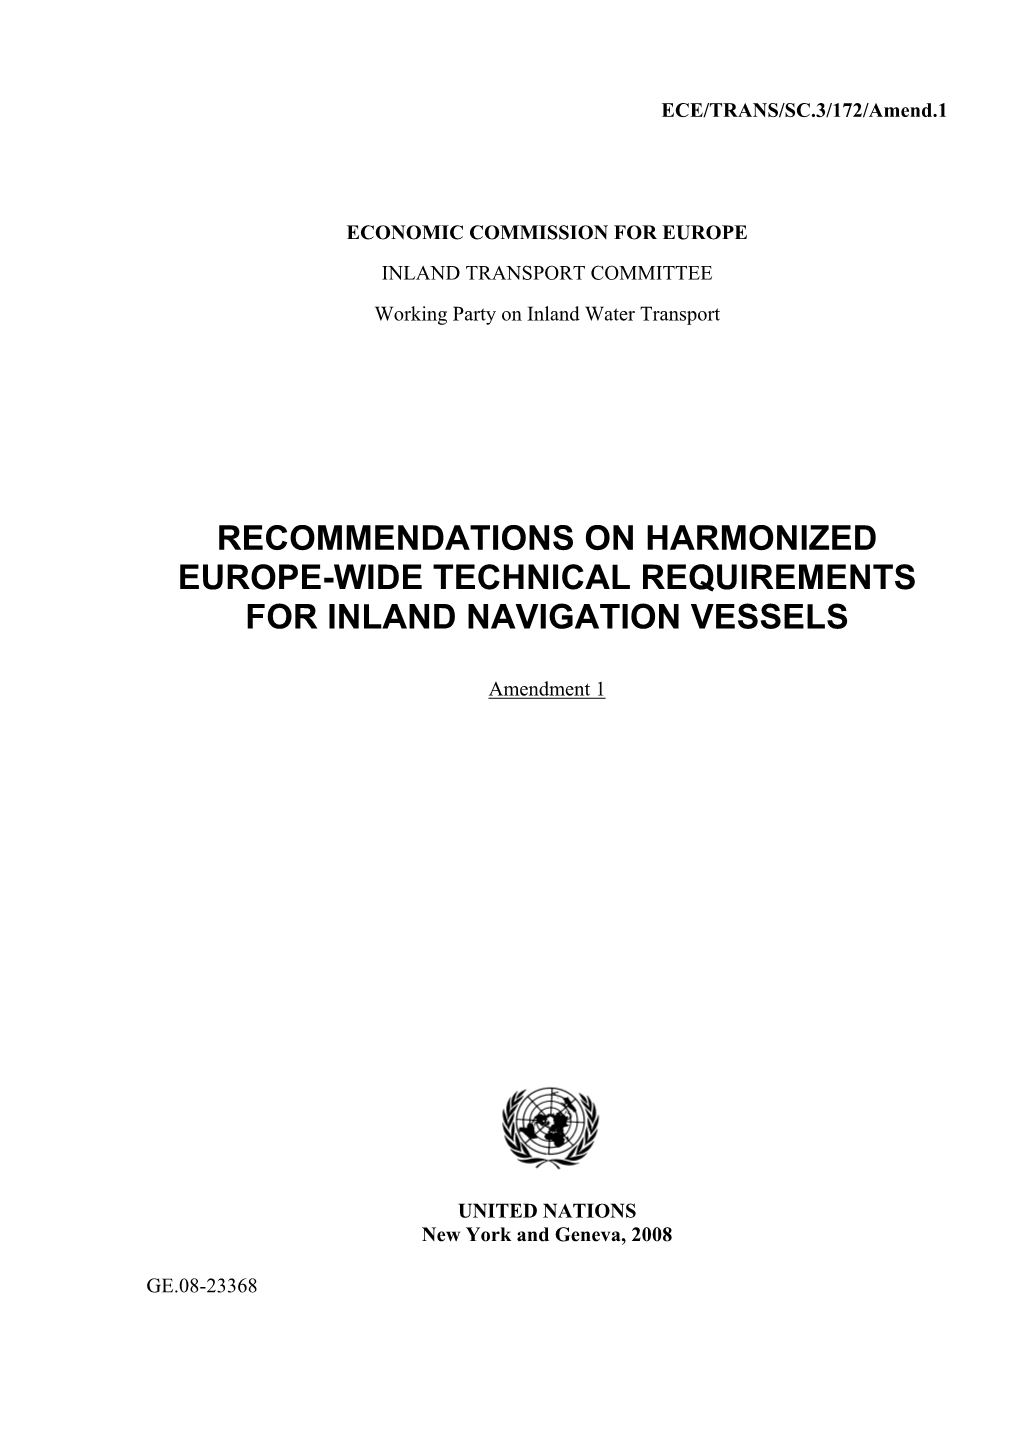 Recommendations on Harmonized Europe-Wide Technical Requirements for Inland Navigation Vessels